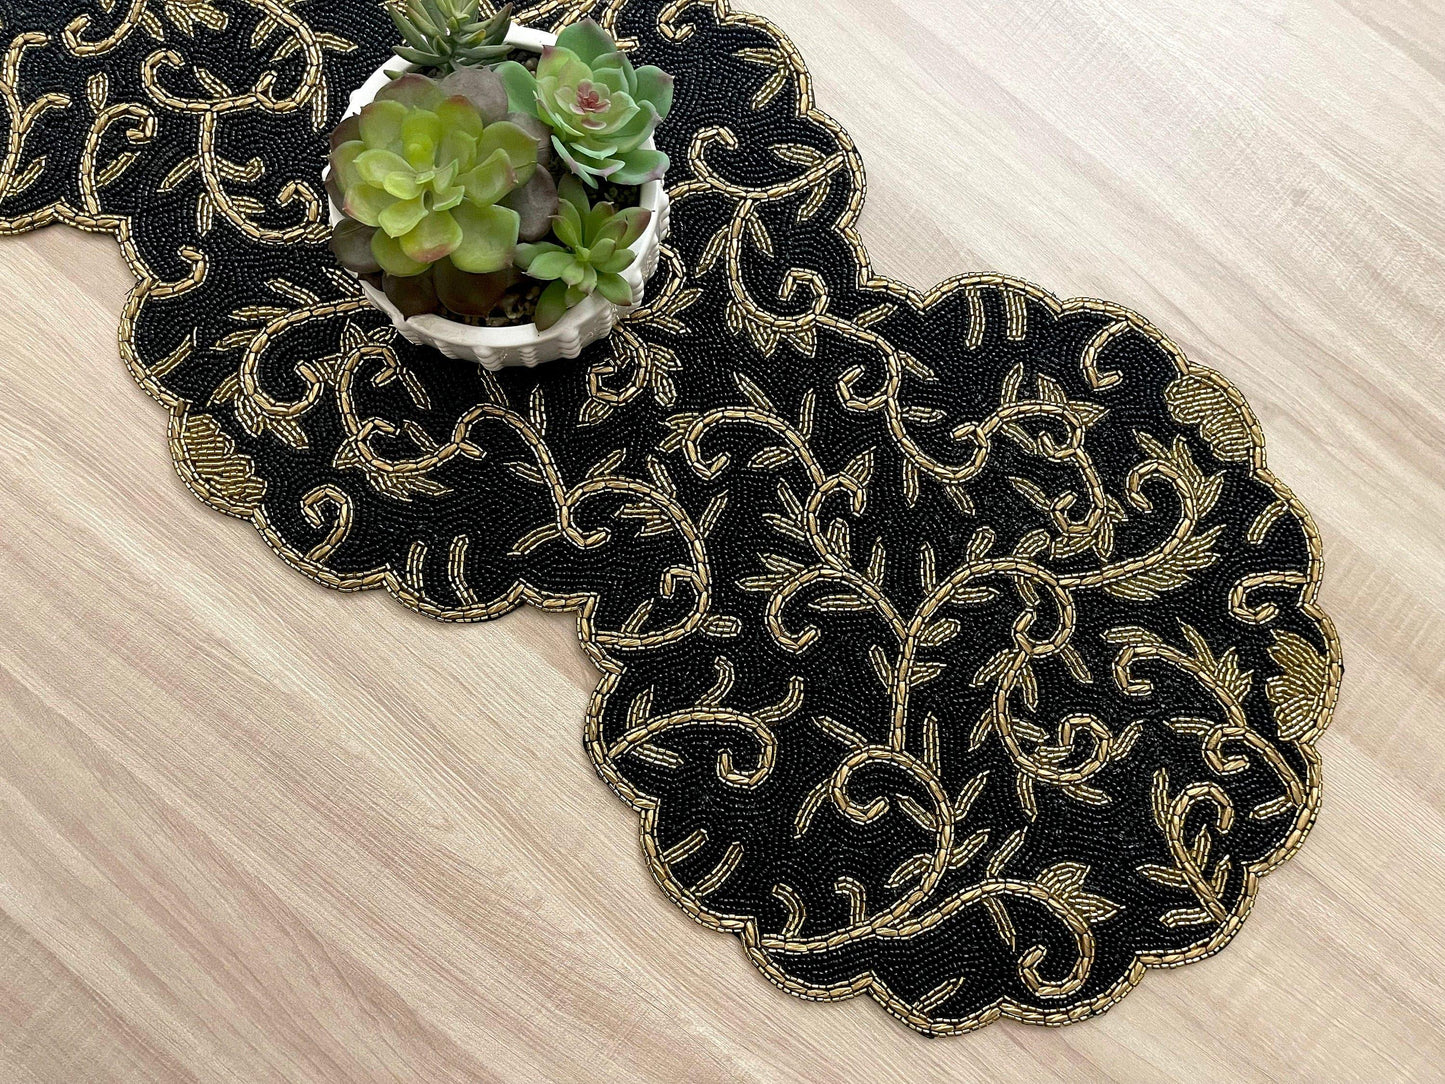 Classic Floral Motif Beaded Table Runner - Black/Gold - MAIA HOMES